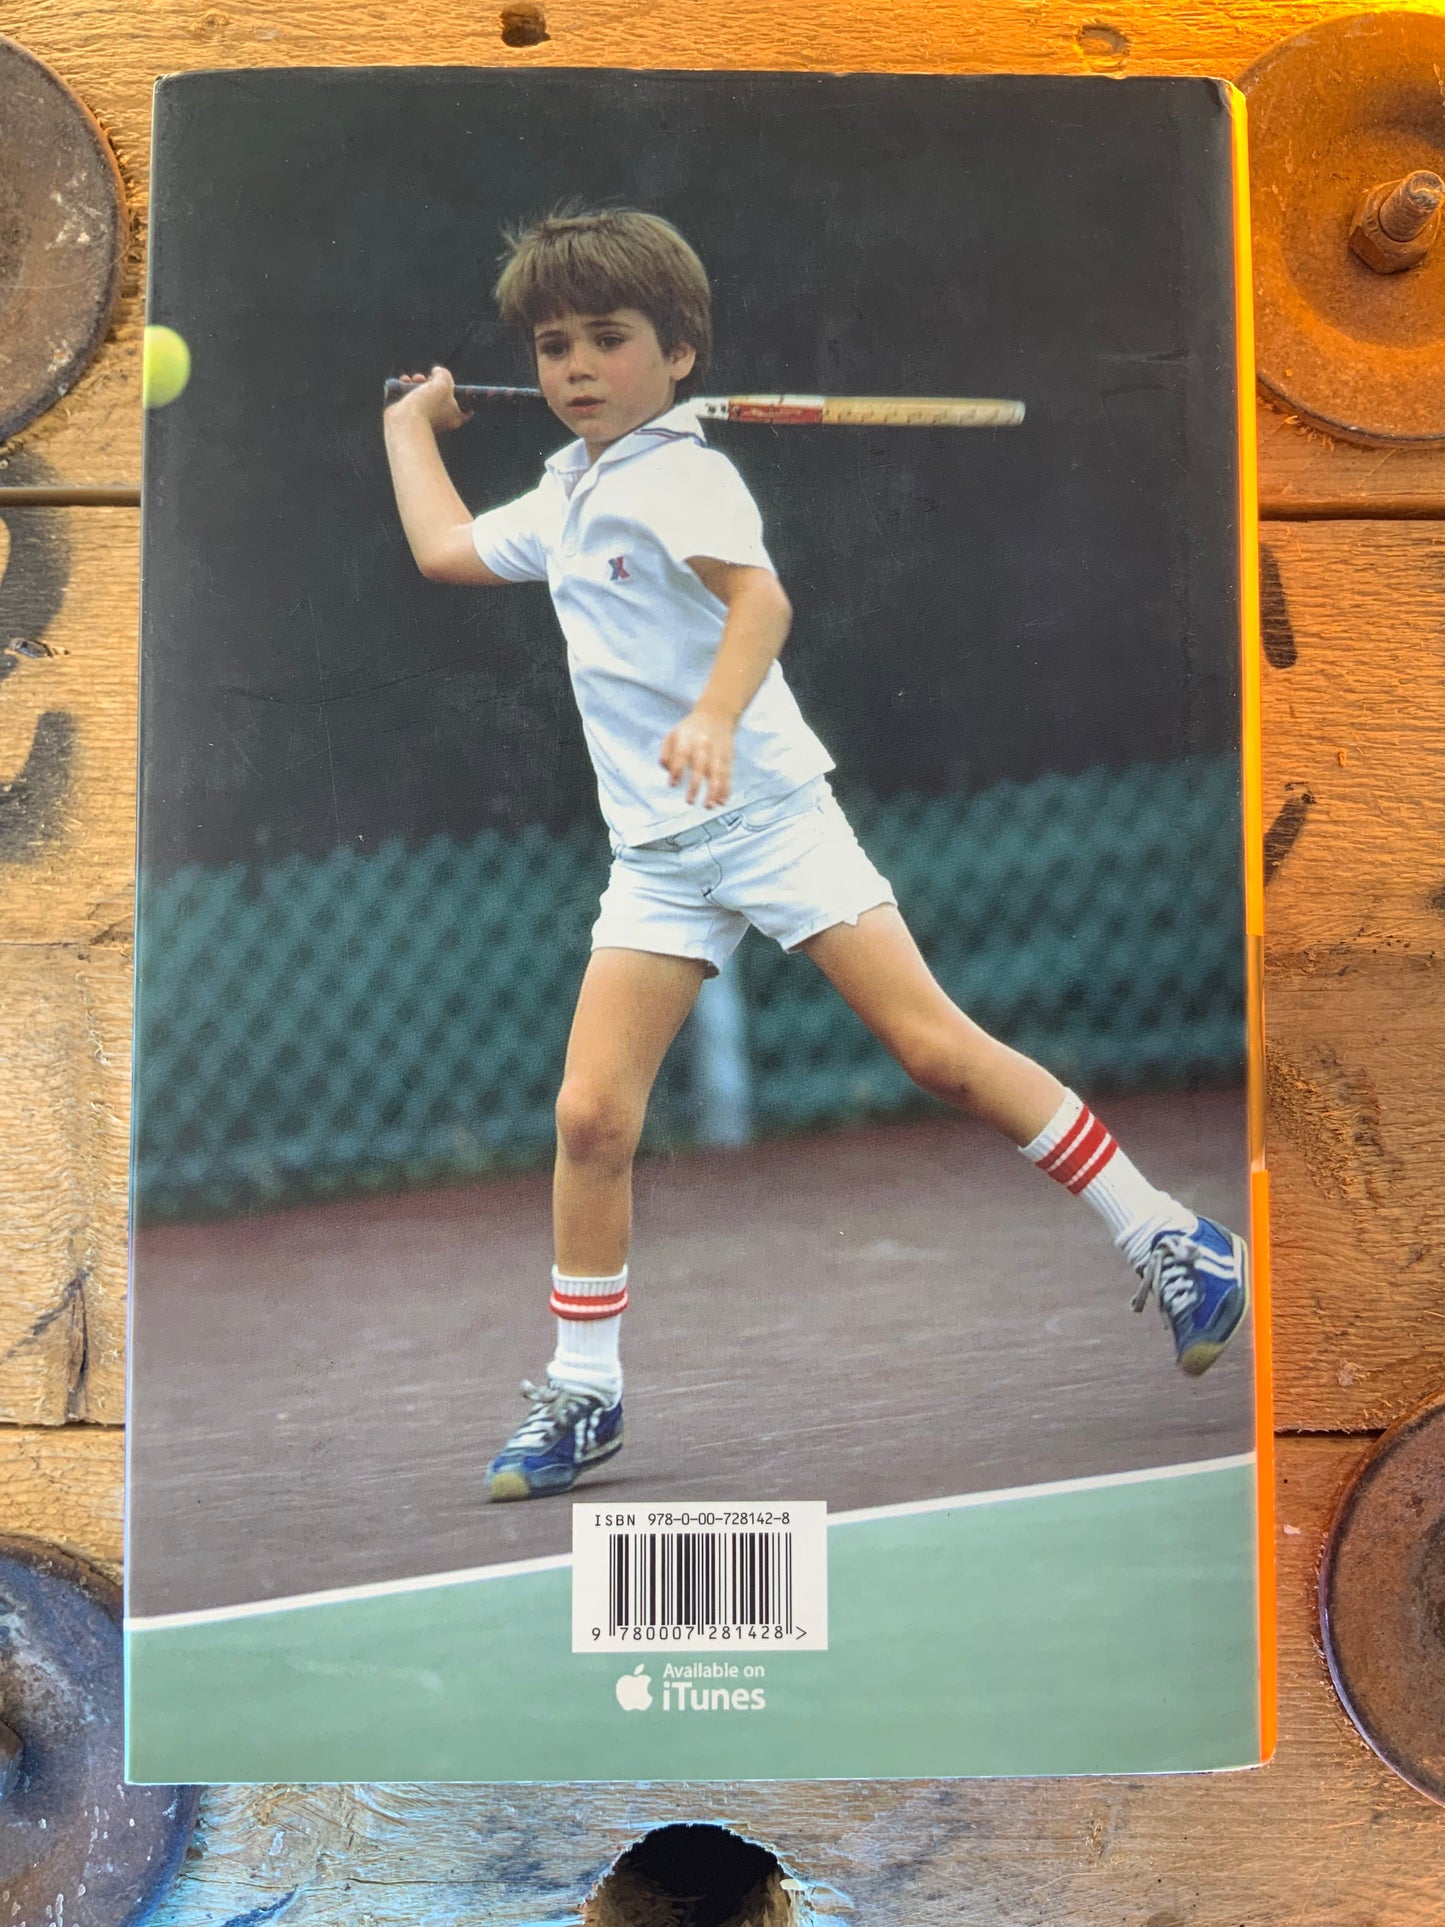 Open : an autobiography , Andre Agassi